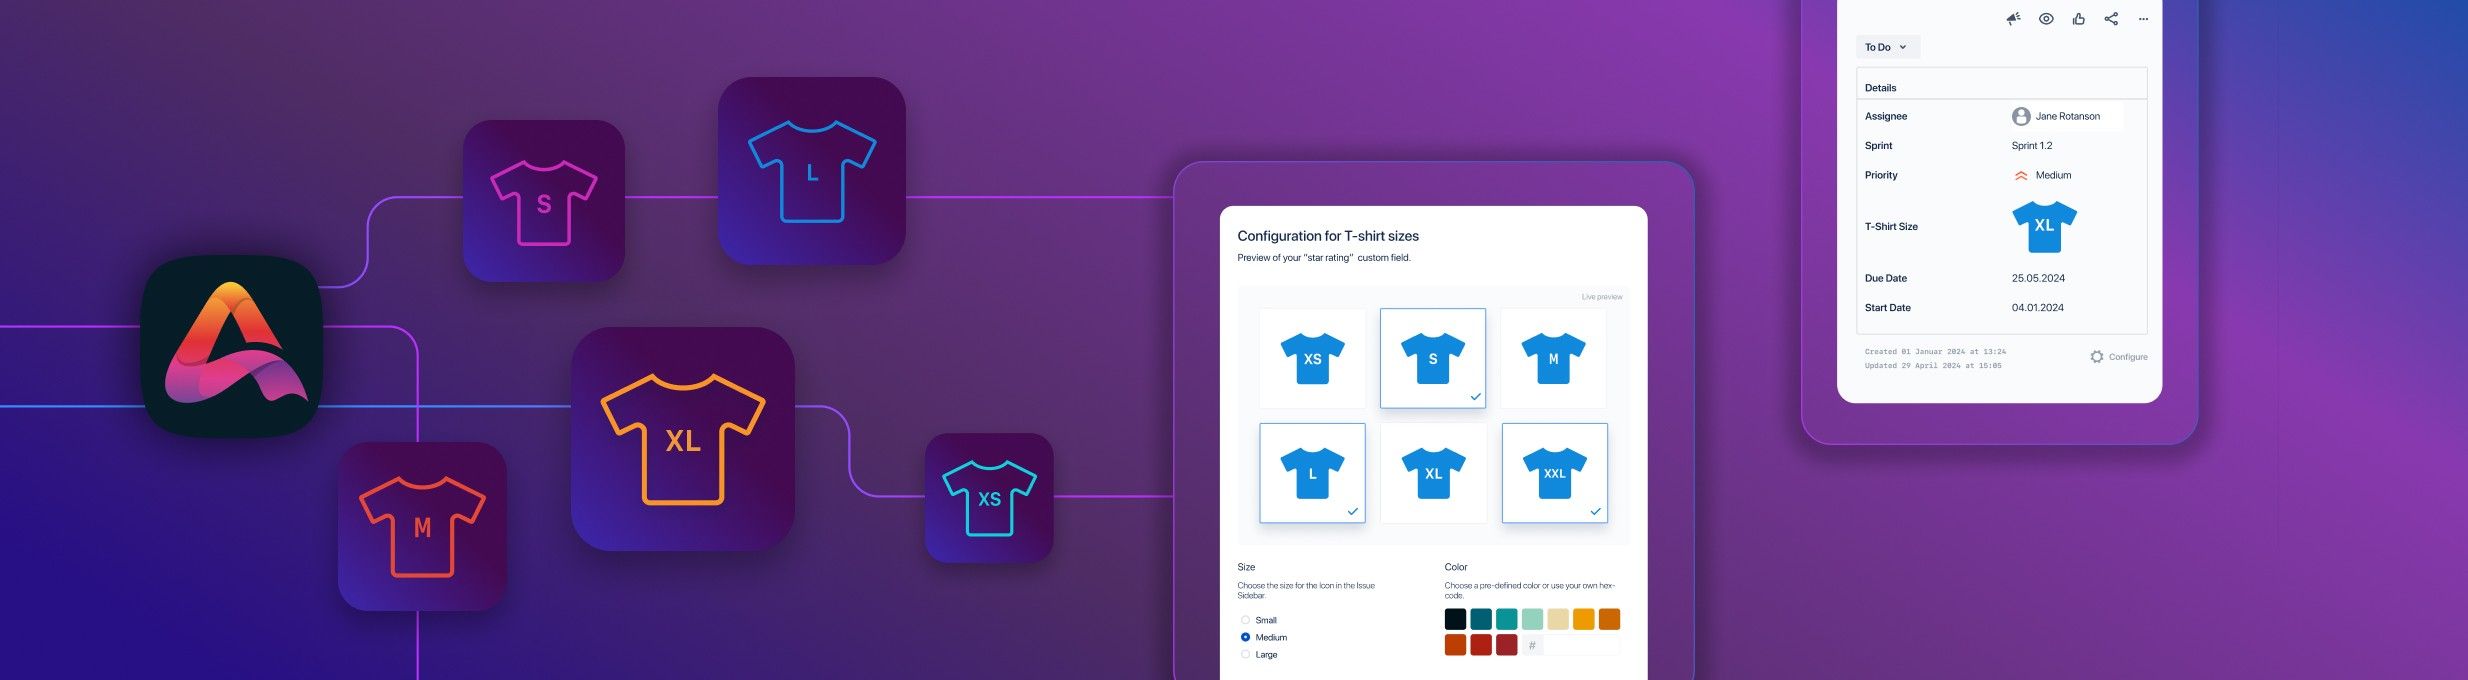 How to Use T-shirt Size Estimation in Jira - banner